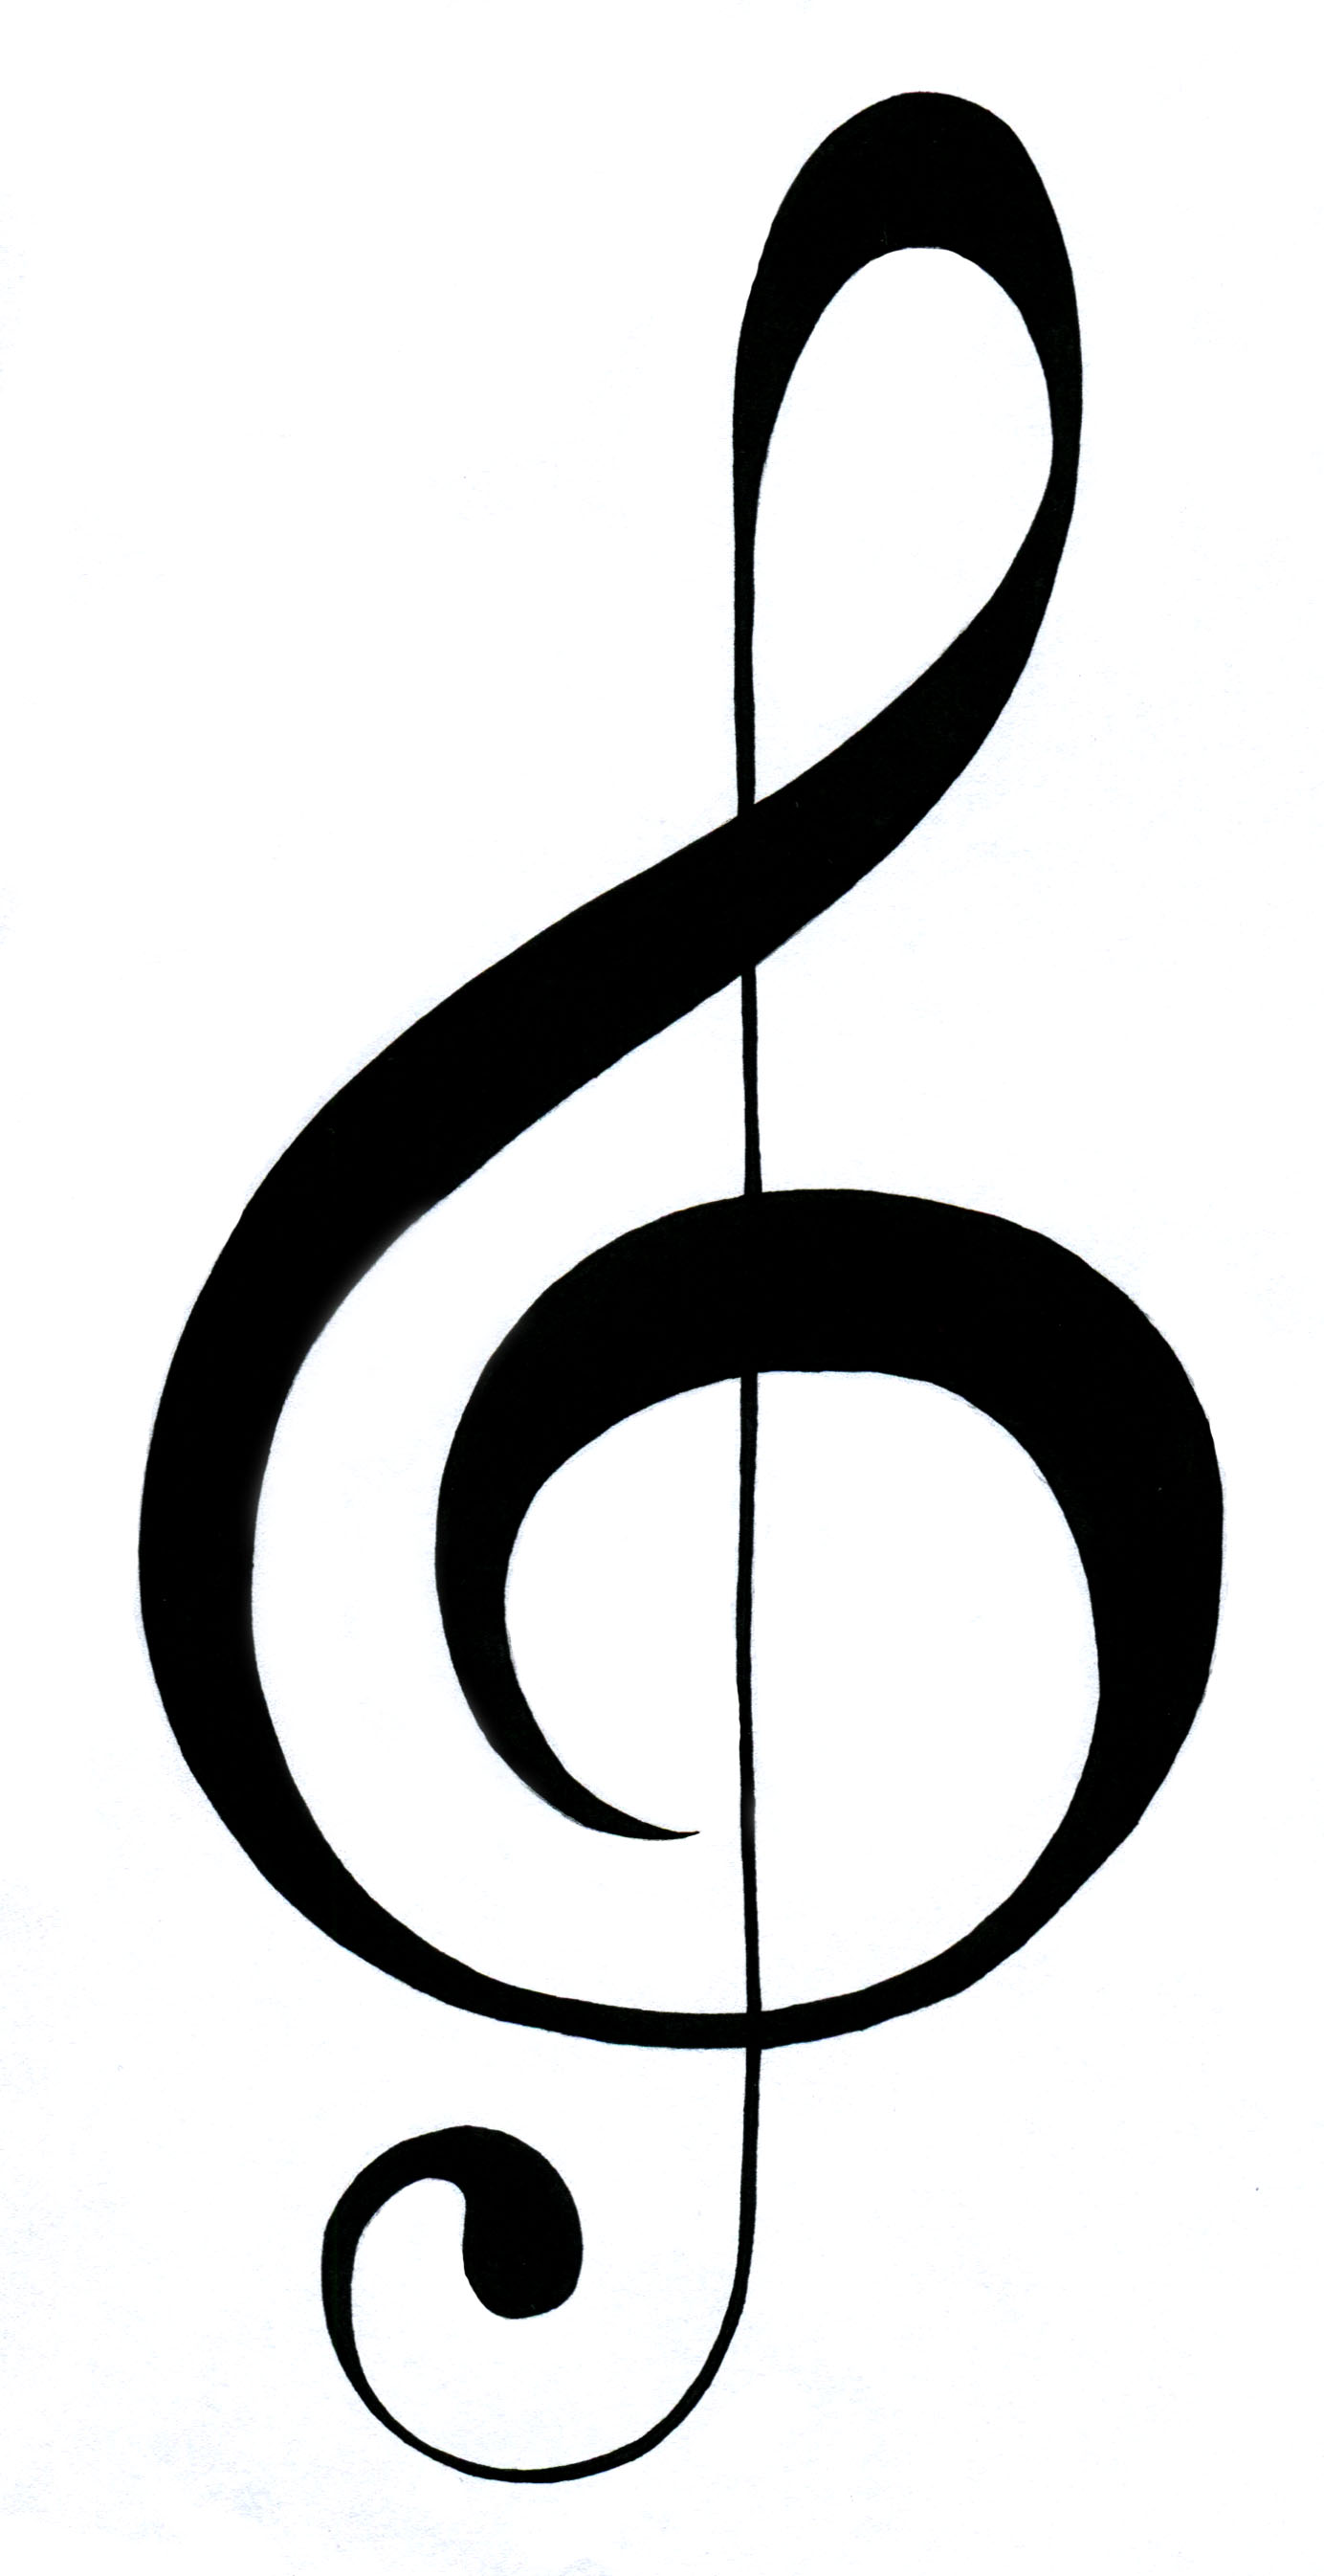 64 Images Of Picture Of Trebl - Treble Clef Clipart